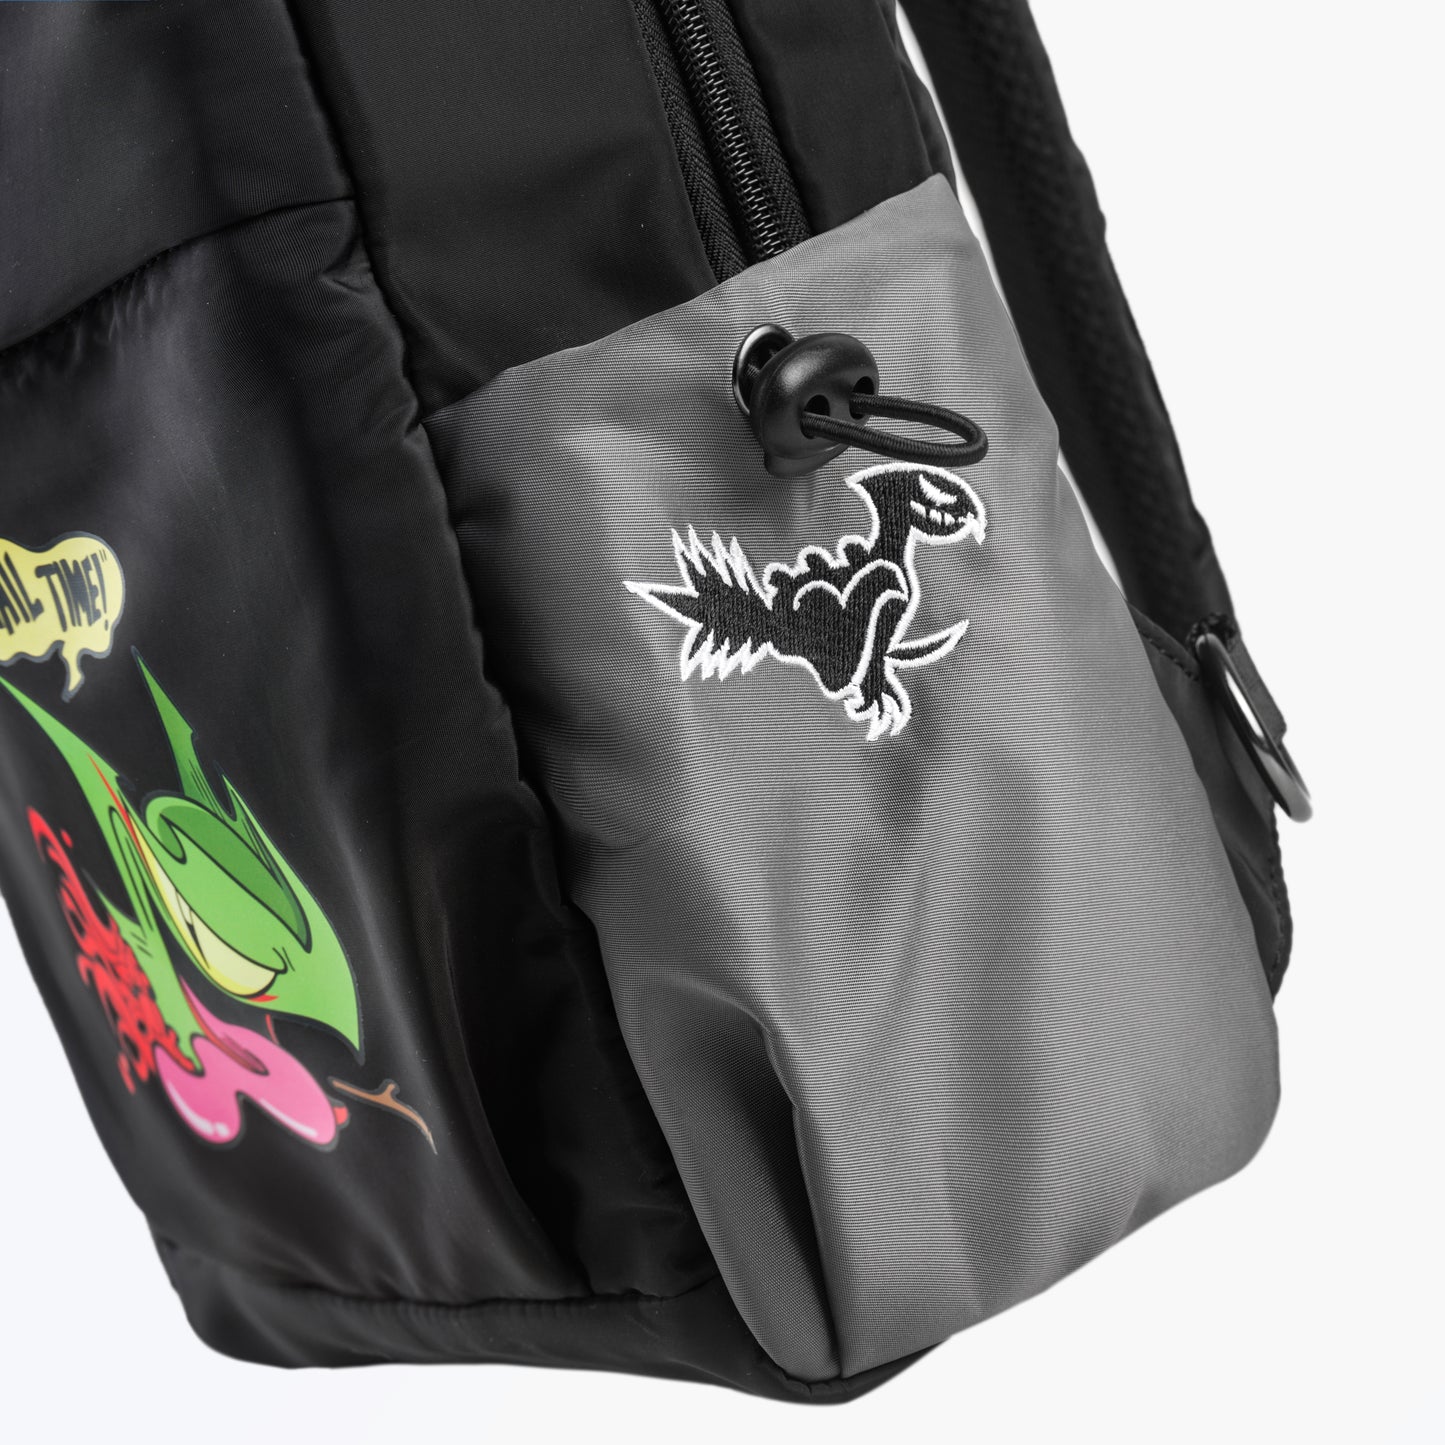 [Pre-Order] Limited Edition: Dovah-Gex Go Bag